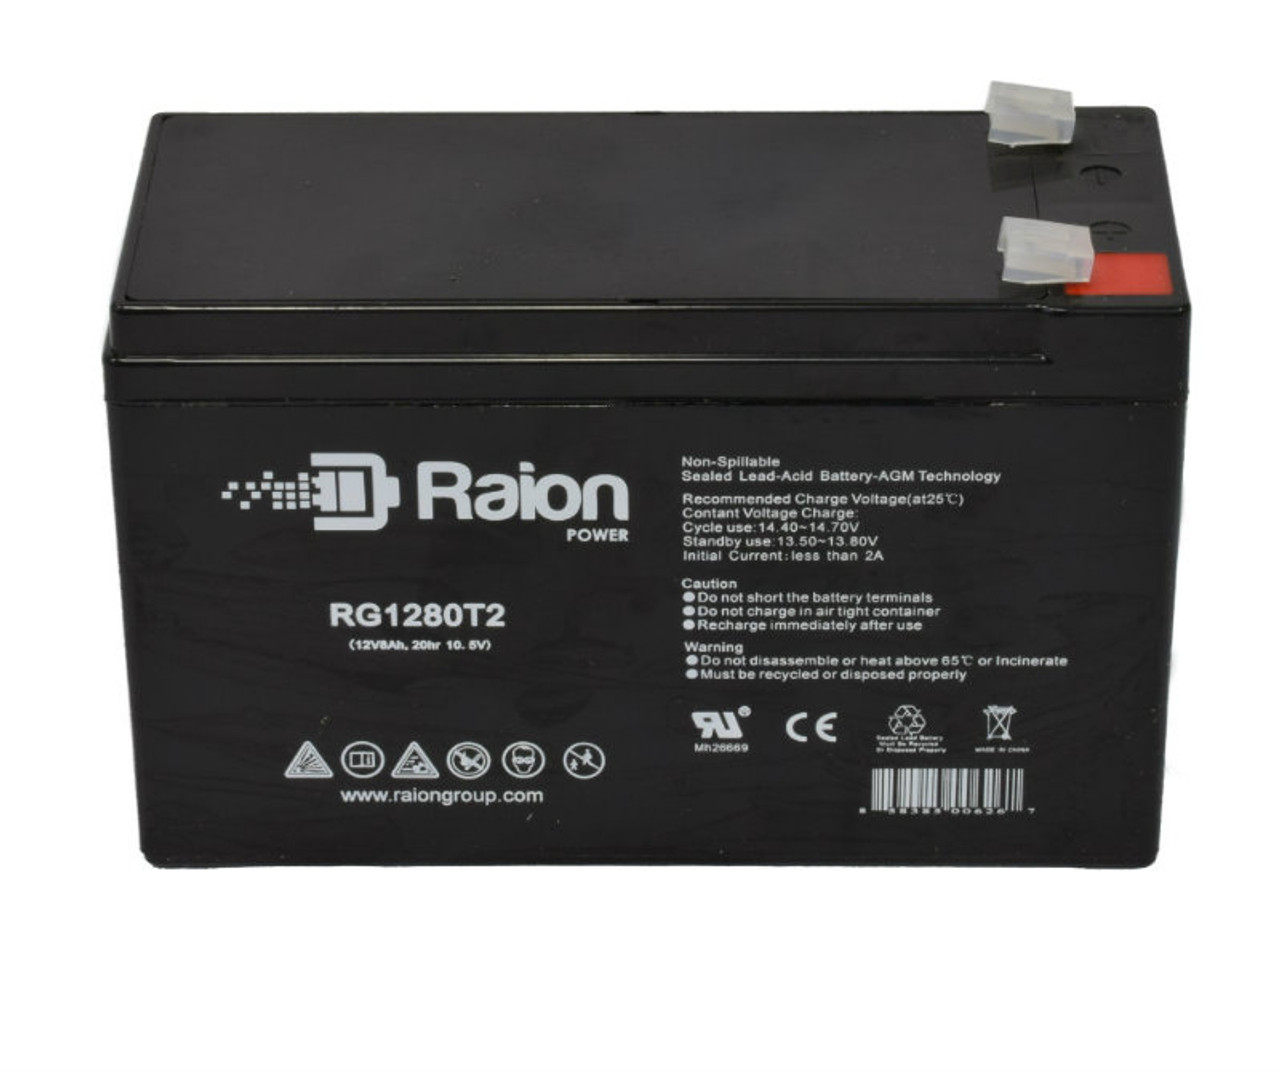 Raion Power RG1280T1 Replacement SLA Battery for BladeZ Powerboard 300